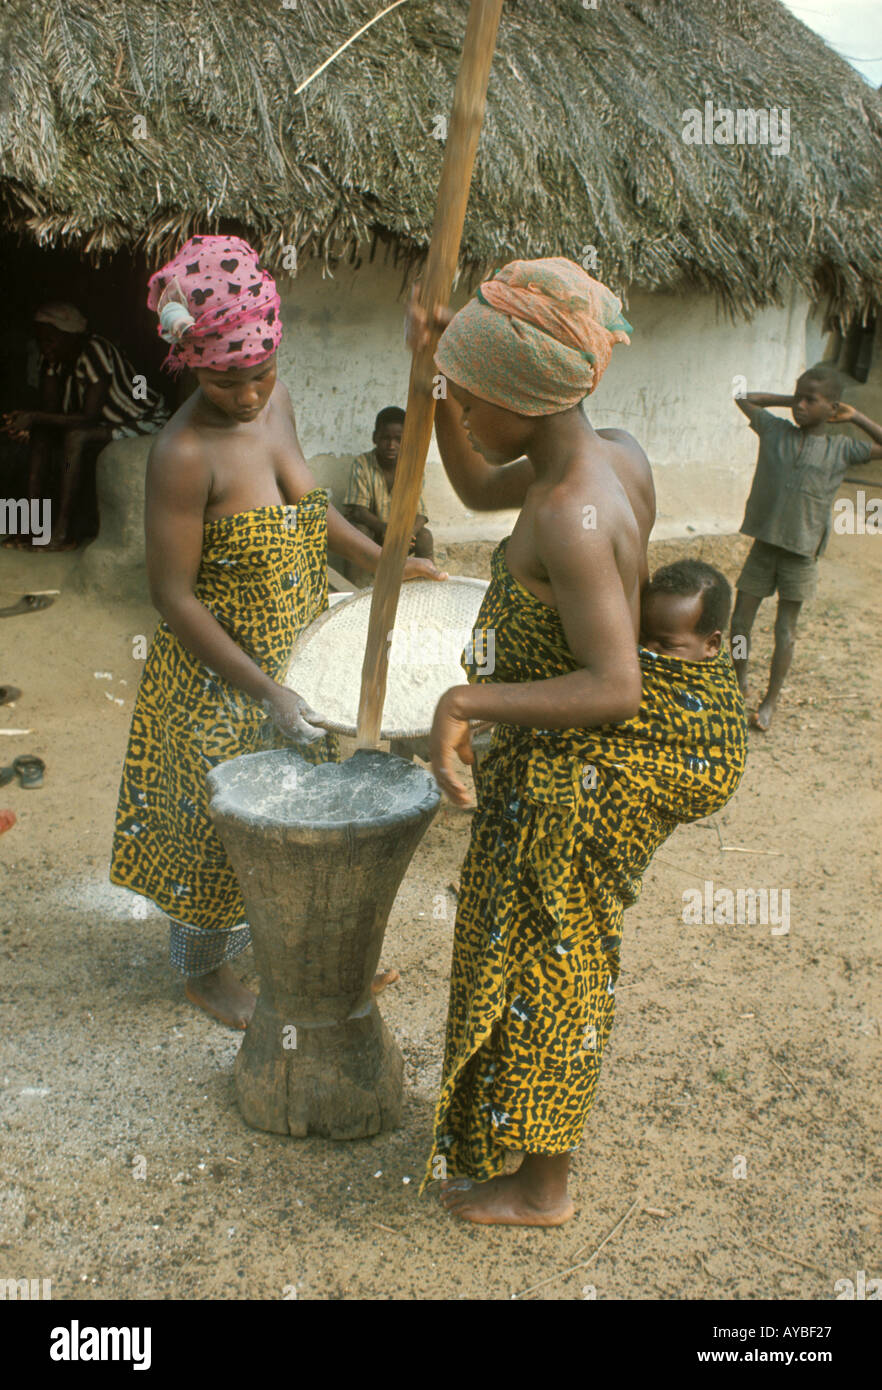 West Africa Liberia Kpelle tribe Women pounding manioc using mortar and pestle Woman is carrying her baby strapped on her back Stock Photo